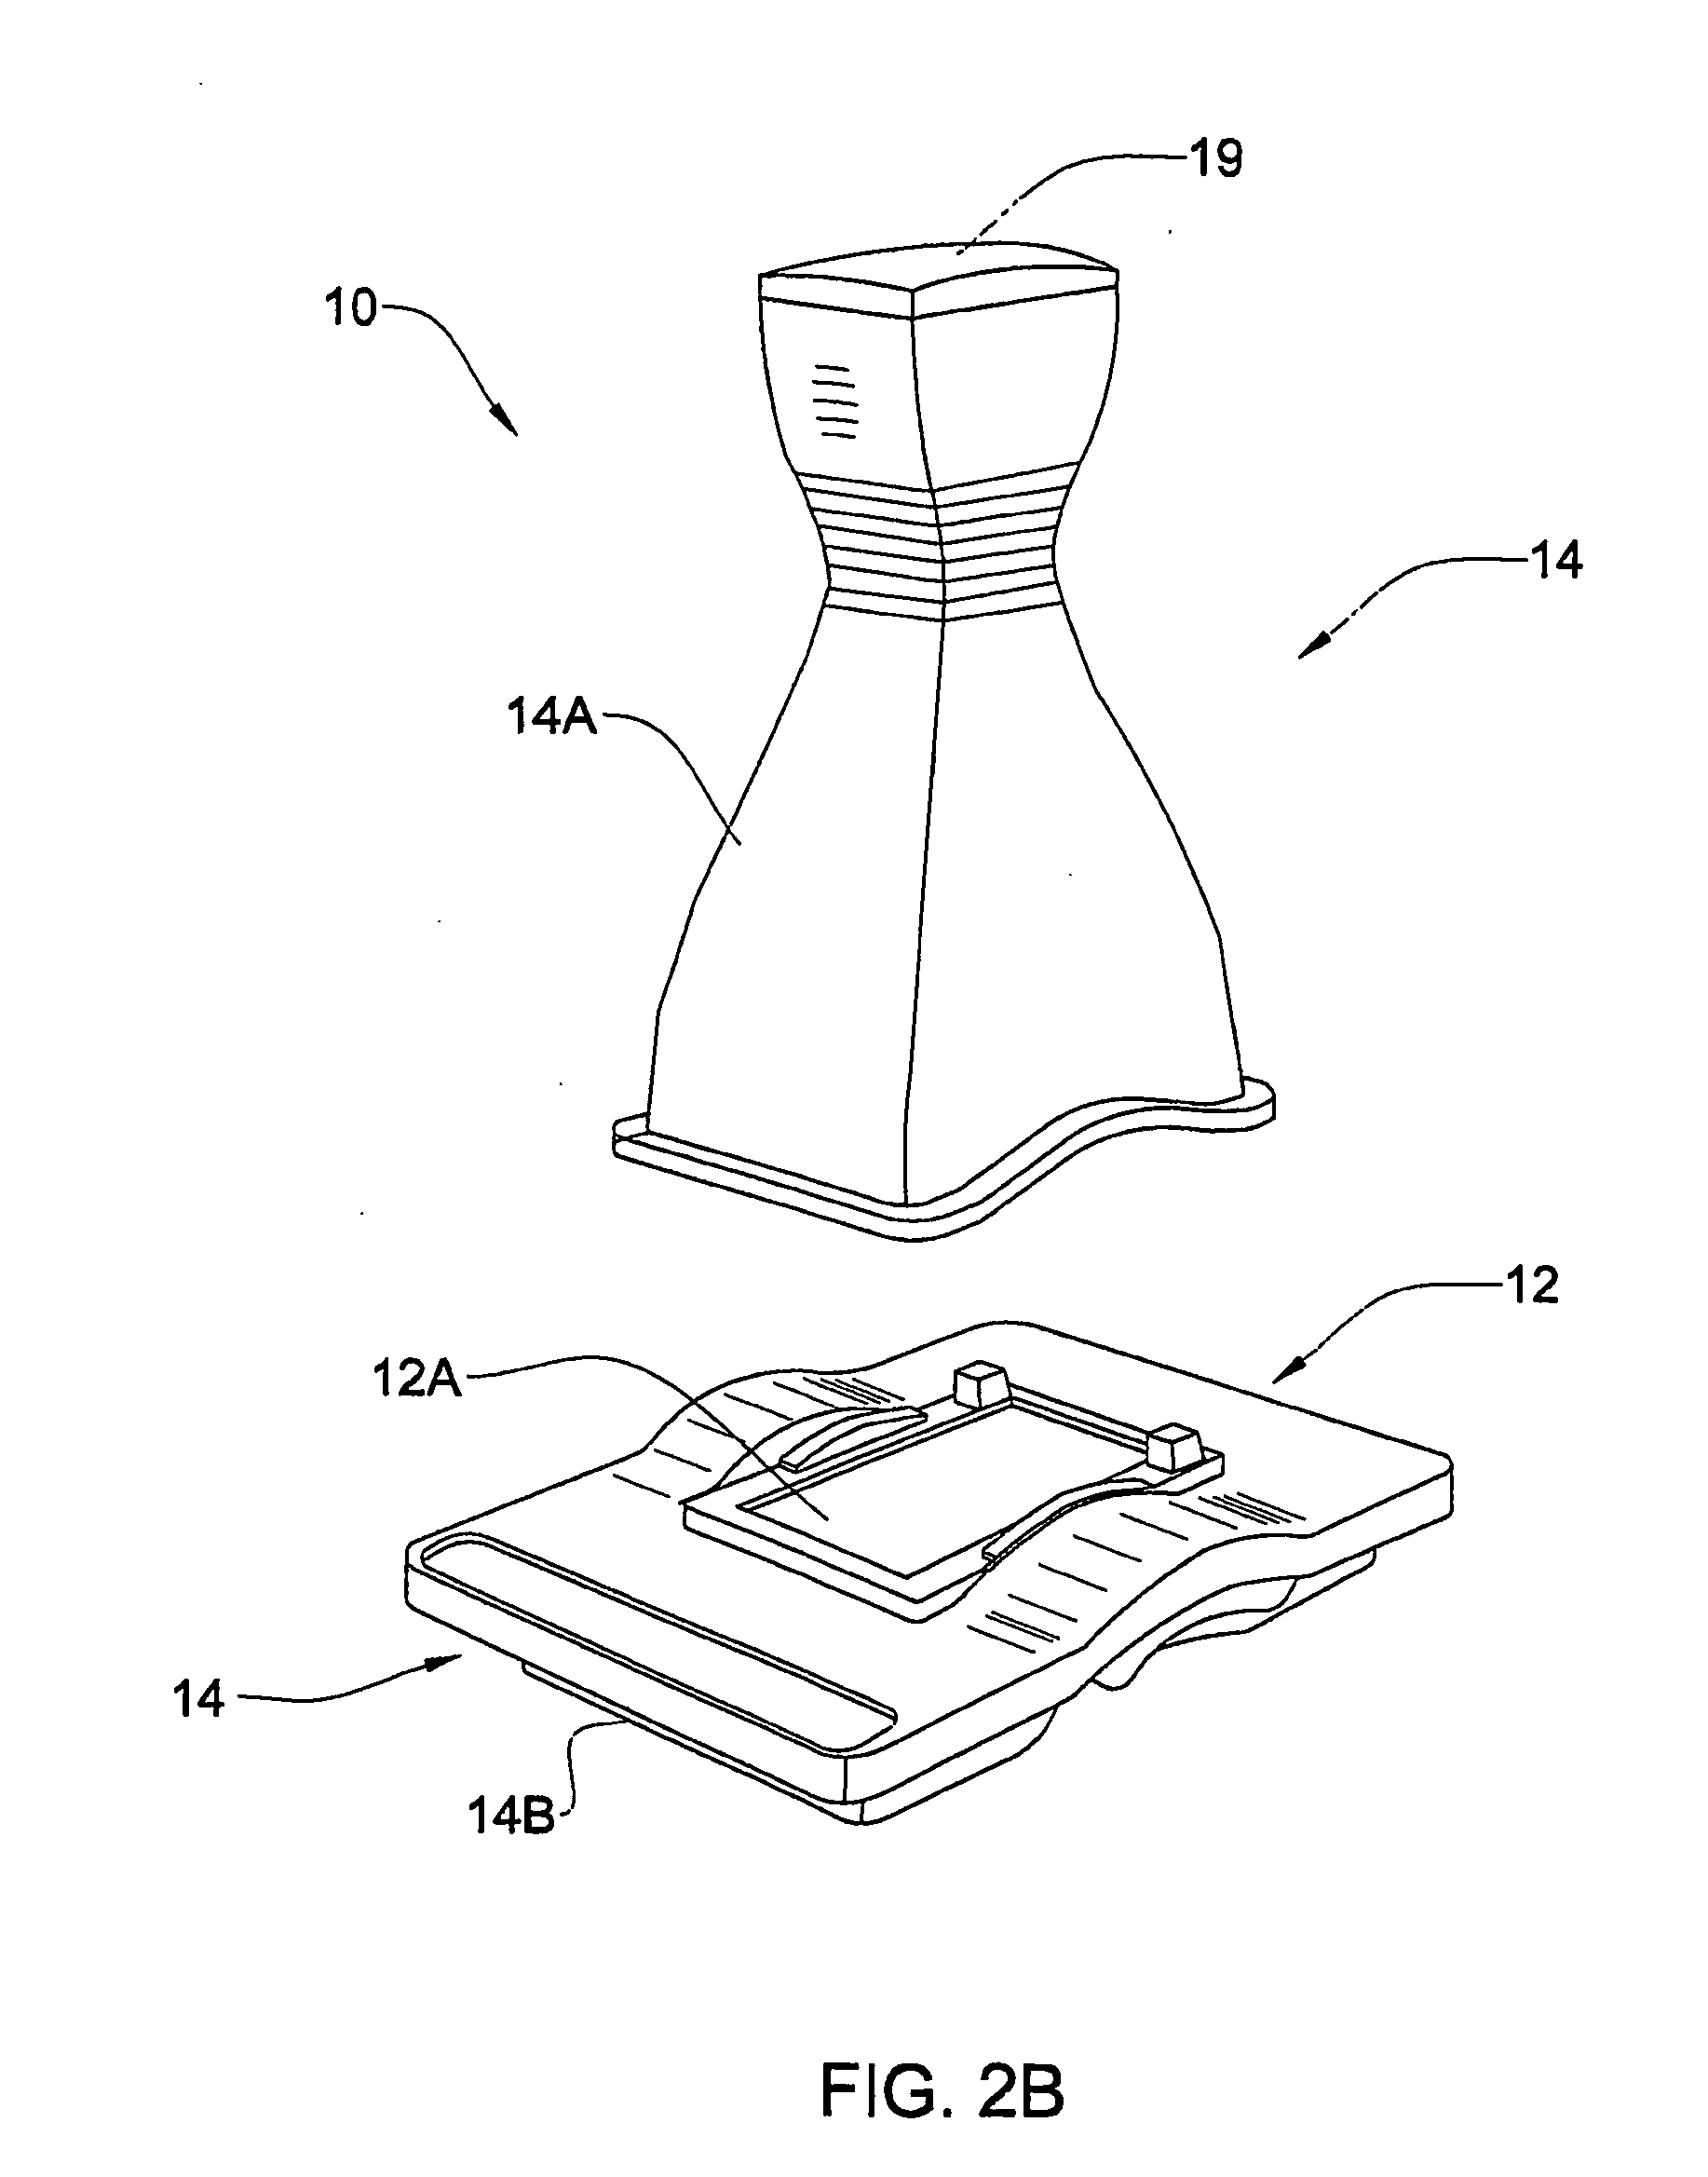 Method and System For Monitoring Material Separation Process Such as Electrophoresis Process in a Sample